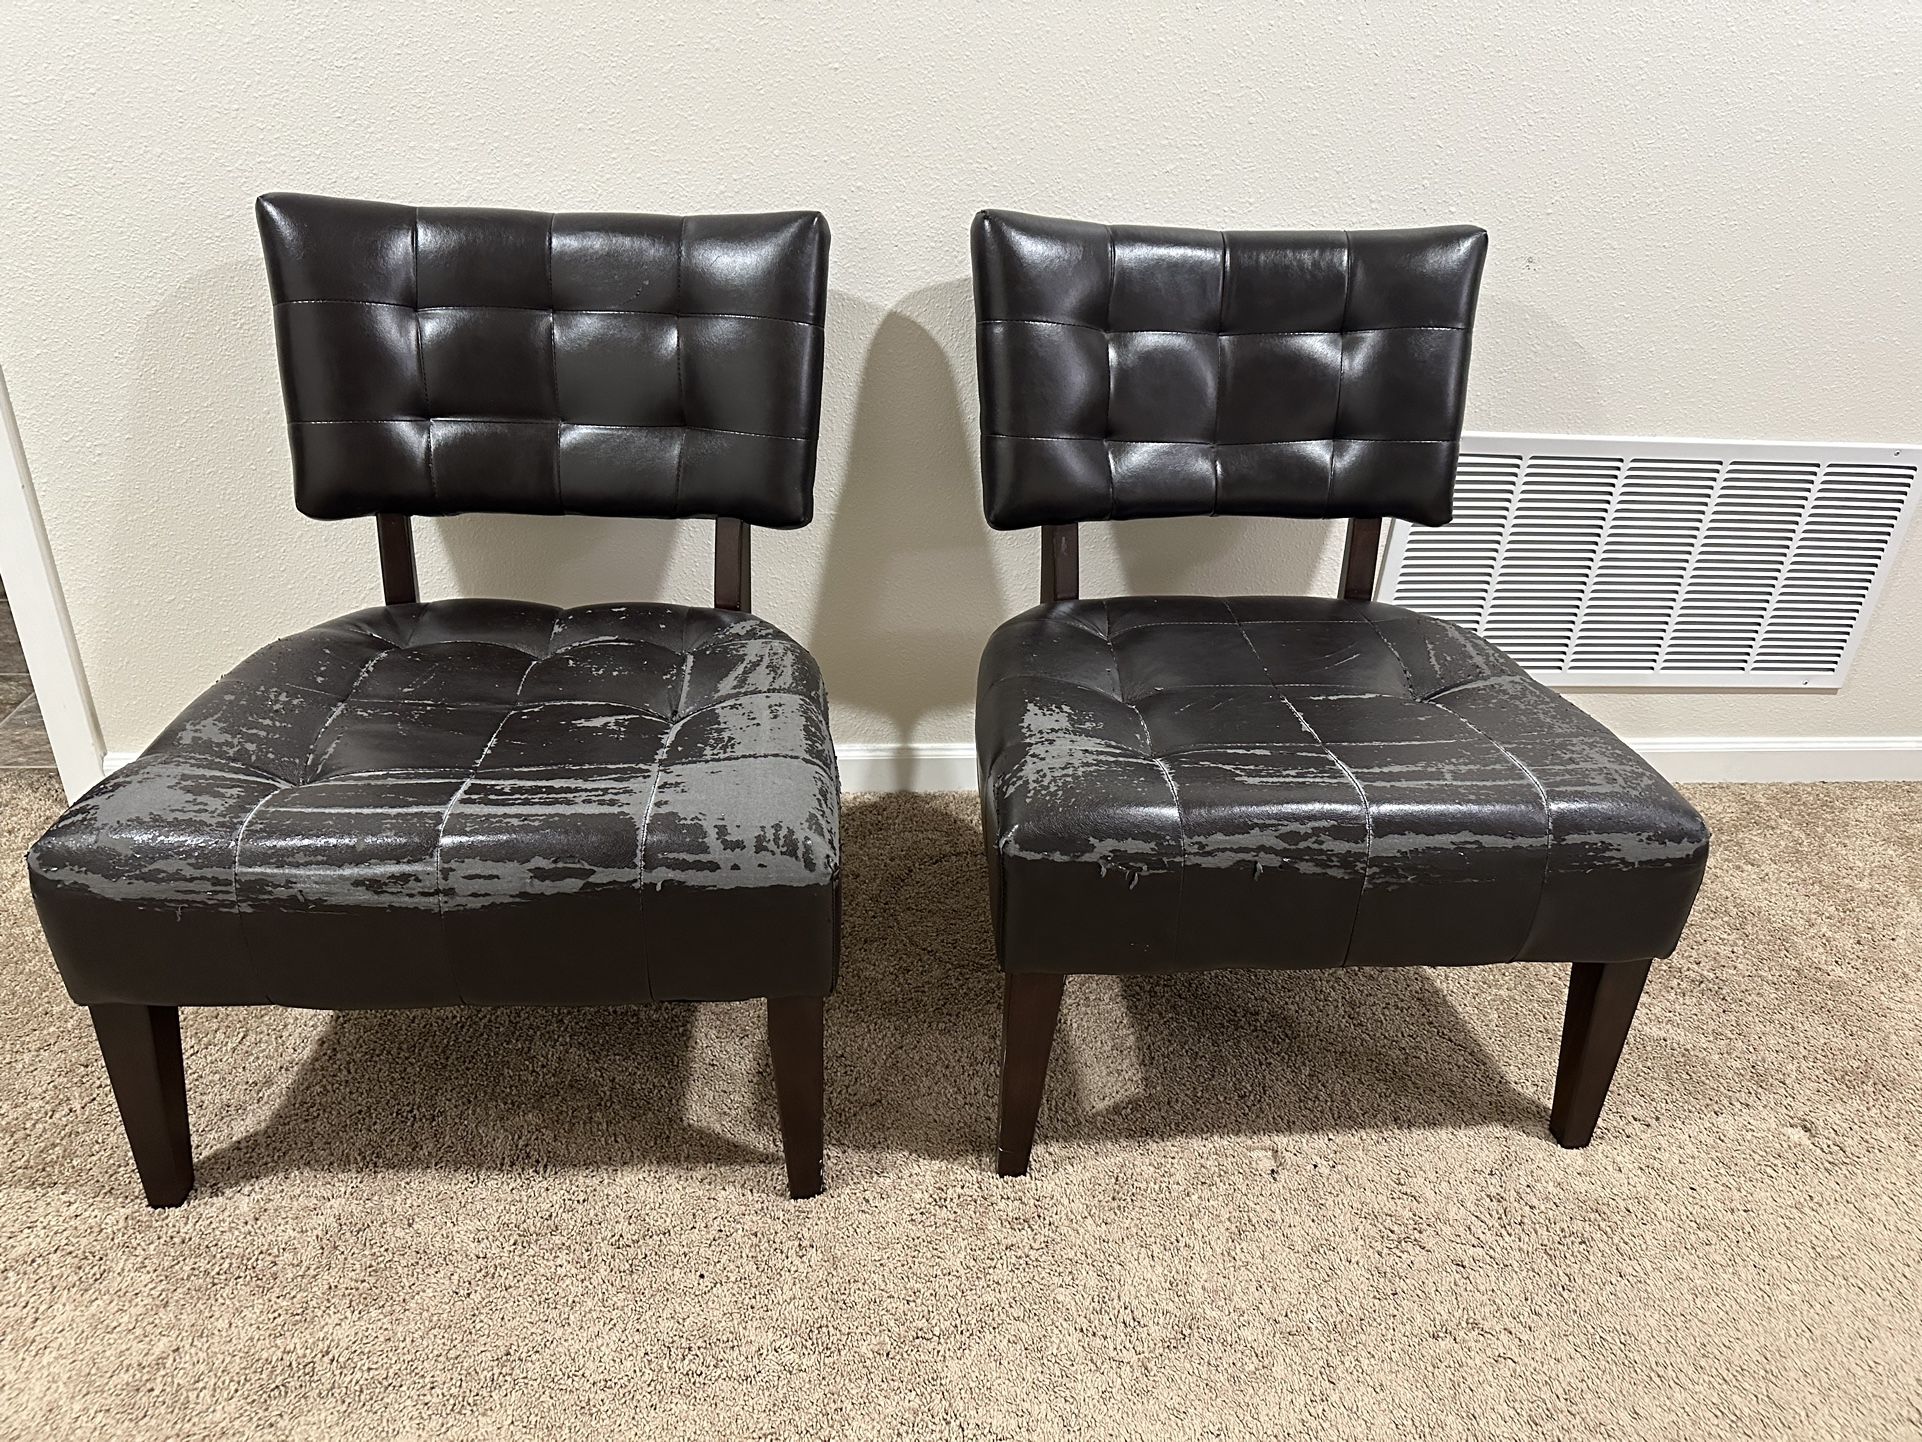 2 Chairs For $10